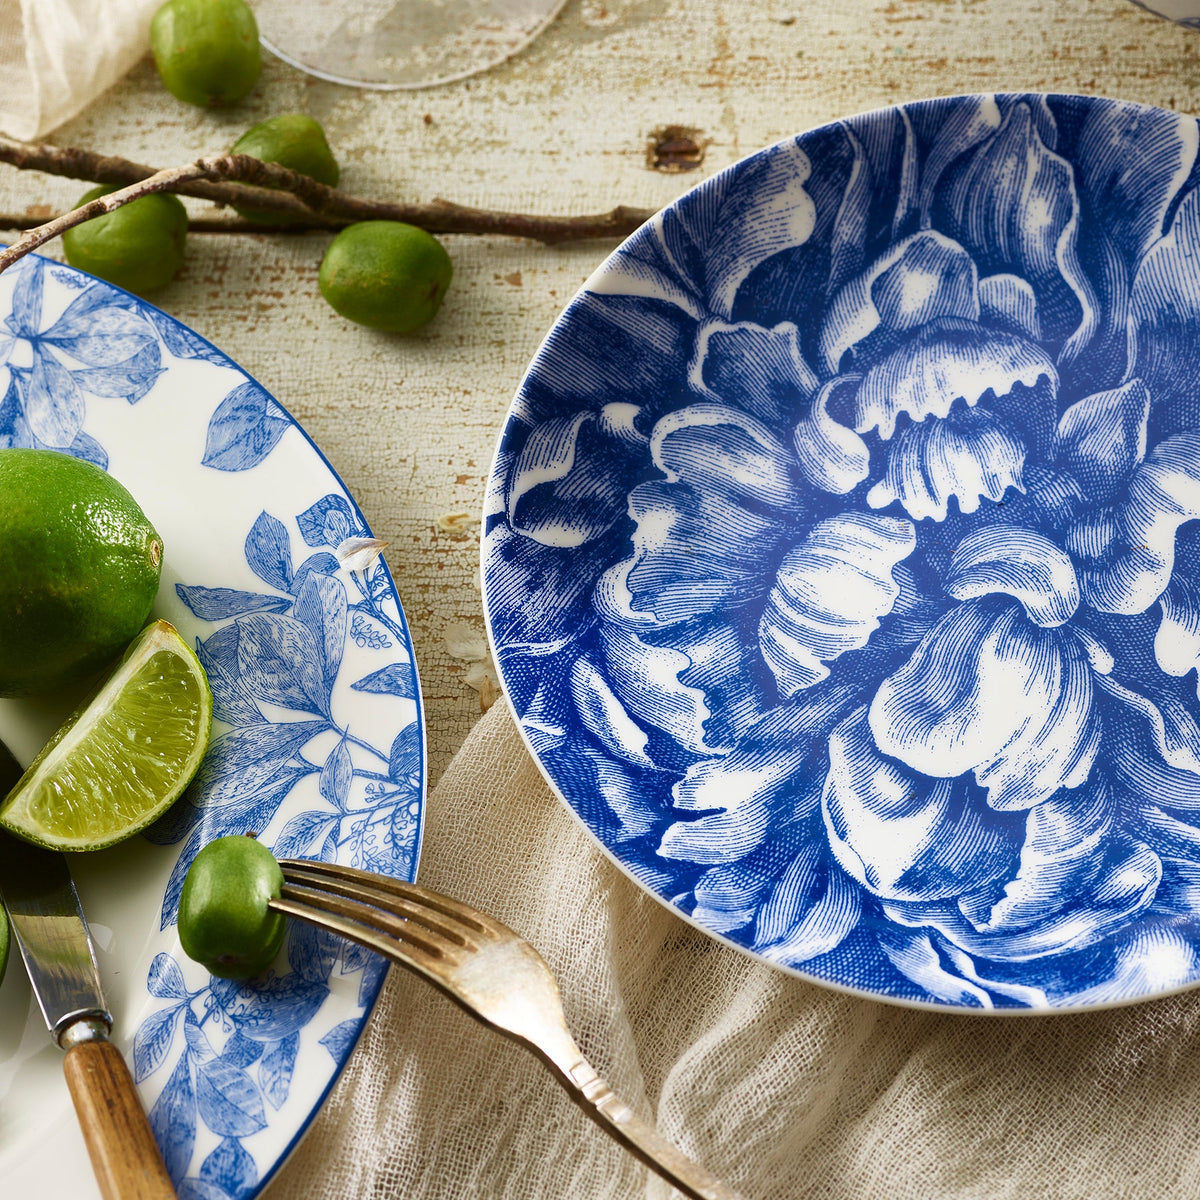 Blue and white Peony 4-Piece Place Setting dinnerware featuring a floral pattern, with cut limes and vintage cutlery on a wooden table by Caskata Artisanal Home.